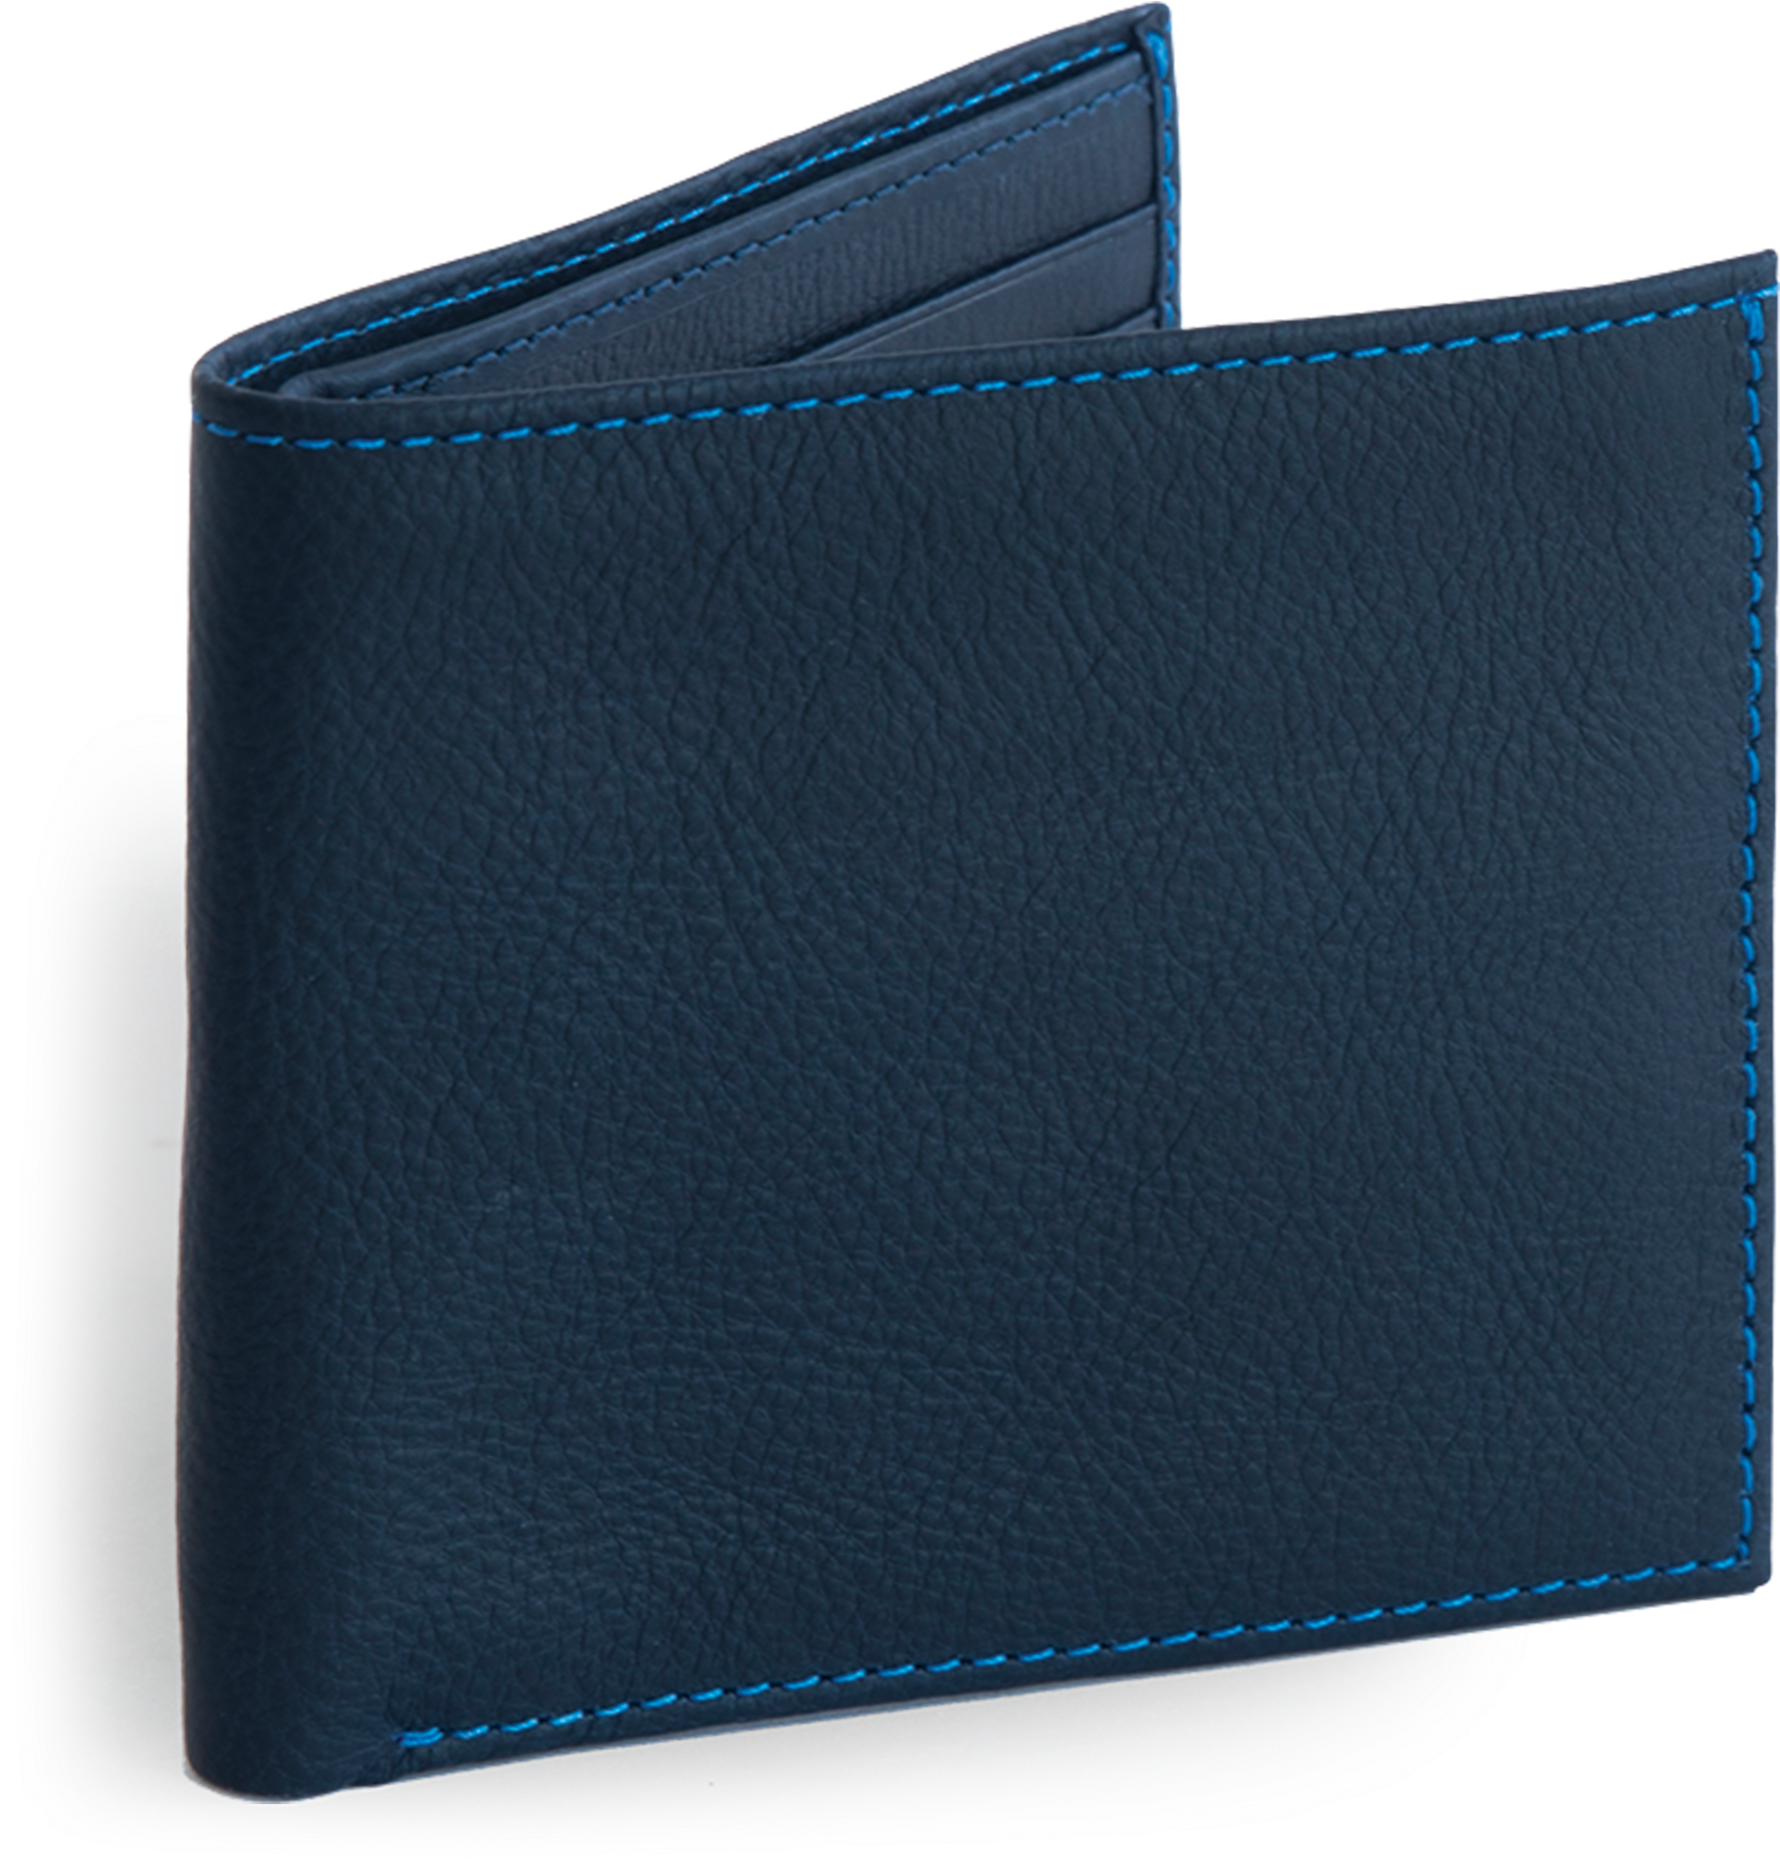 A Blue Wallet With Blue Stitching